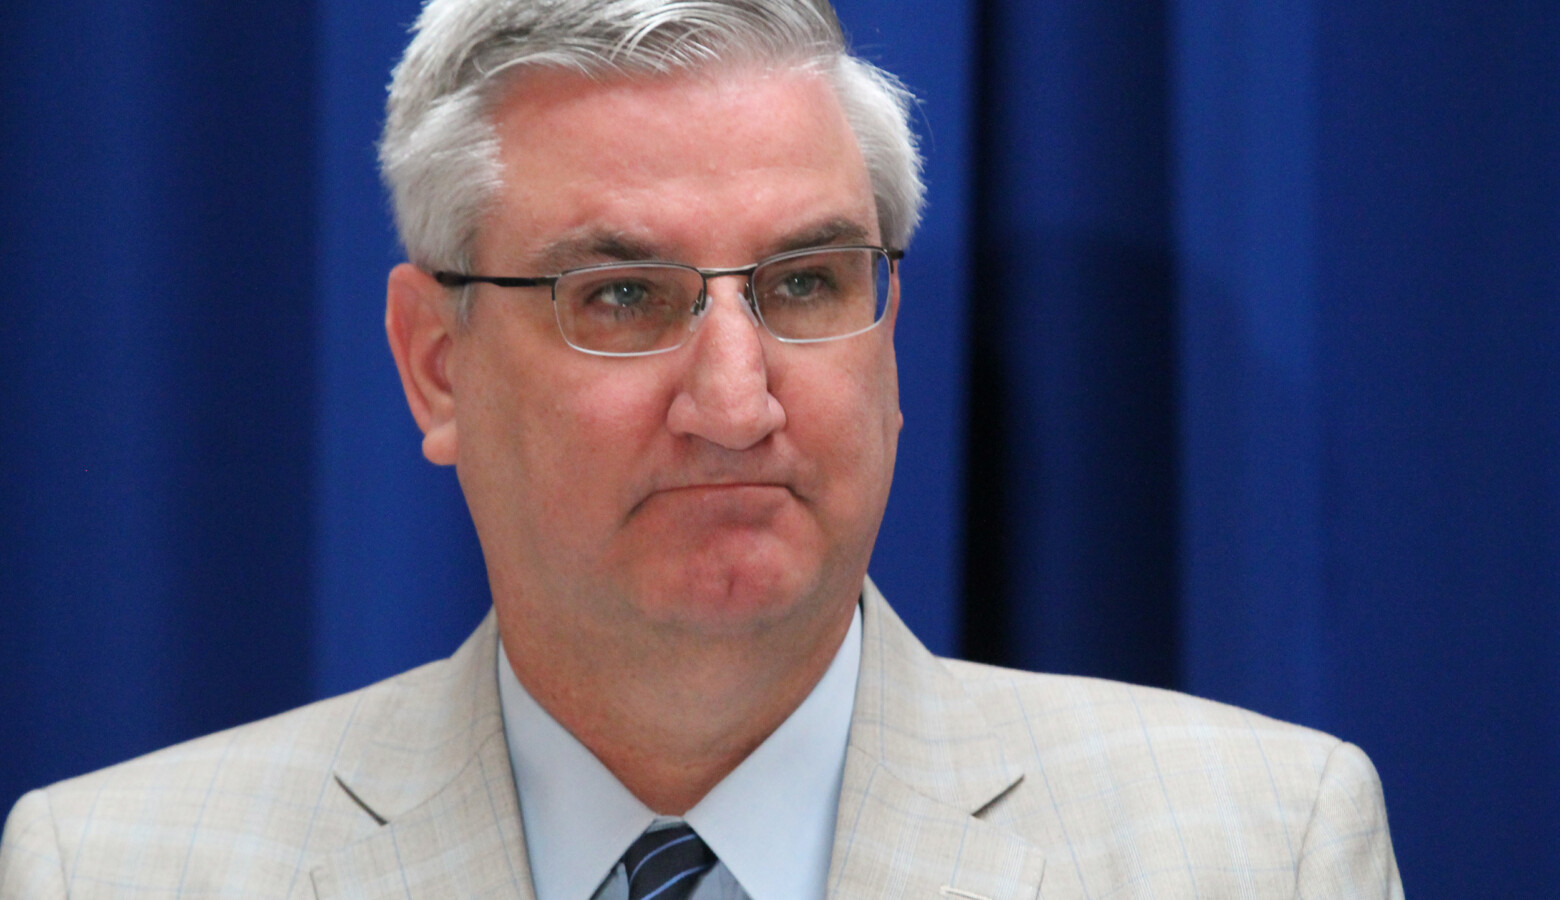 Gov. Eric Holcomb signed into law an anti-abortion measure that requires doctors to tell patients about a procedure the American College of Obstetricians and Gynecologists calls "unproven and unethical." (Lauren Chapman/IPB News)